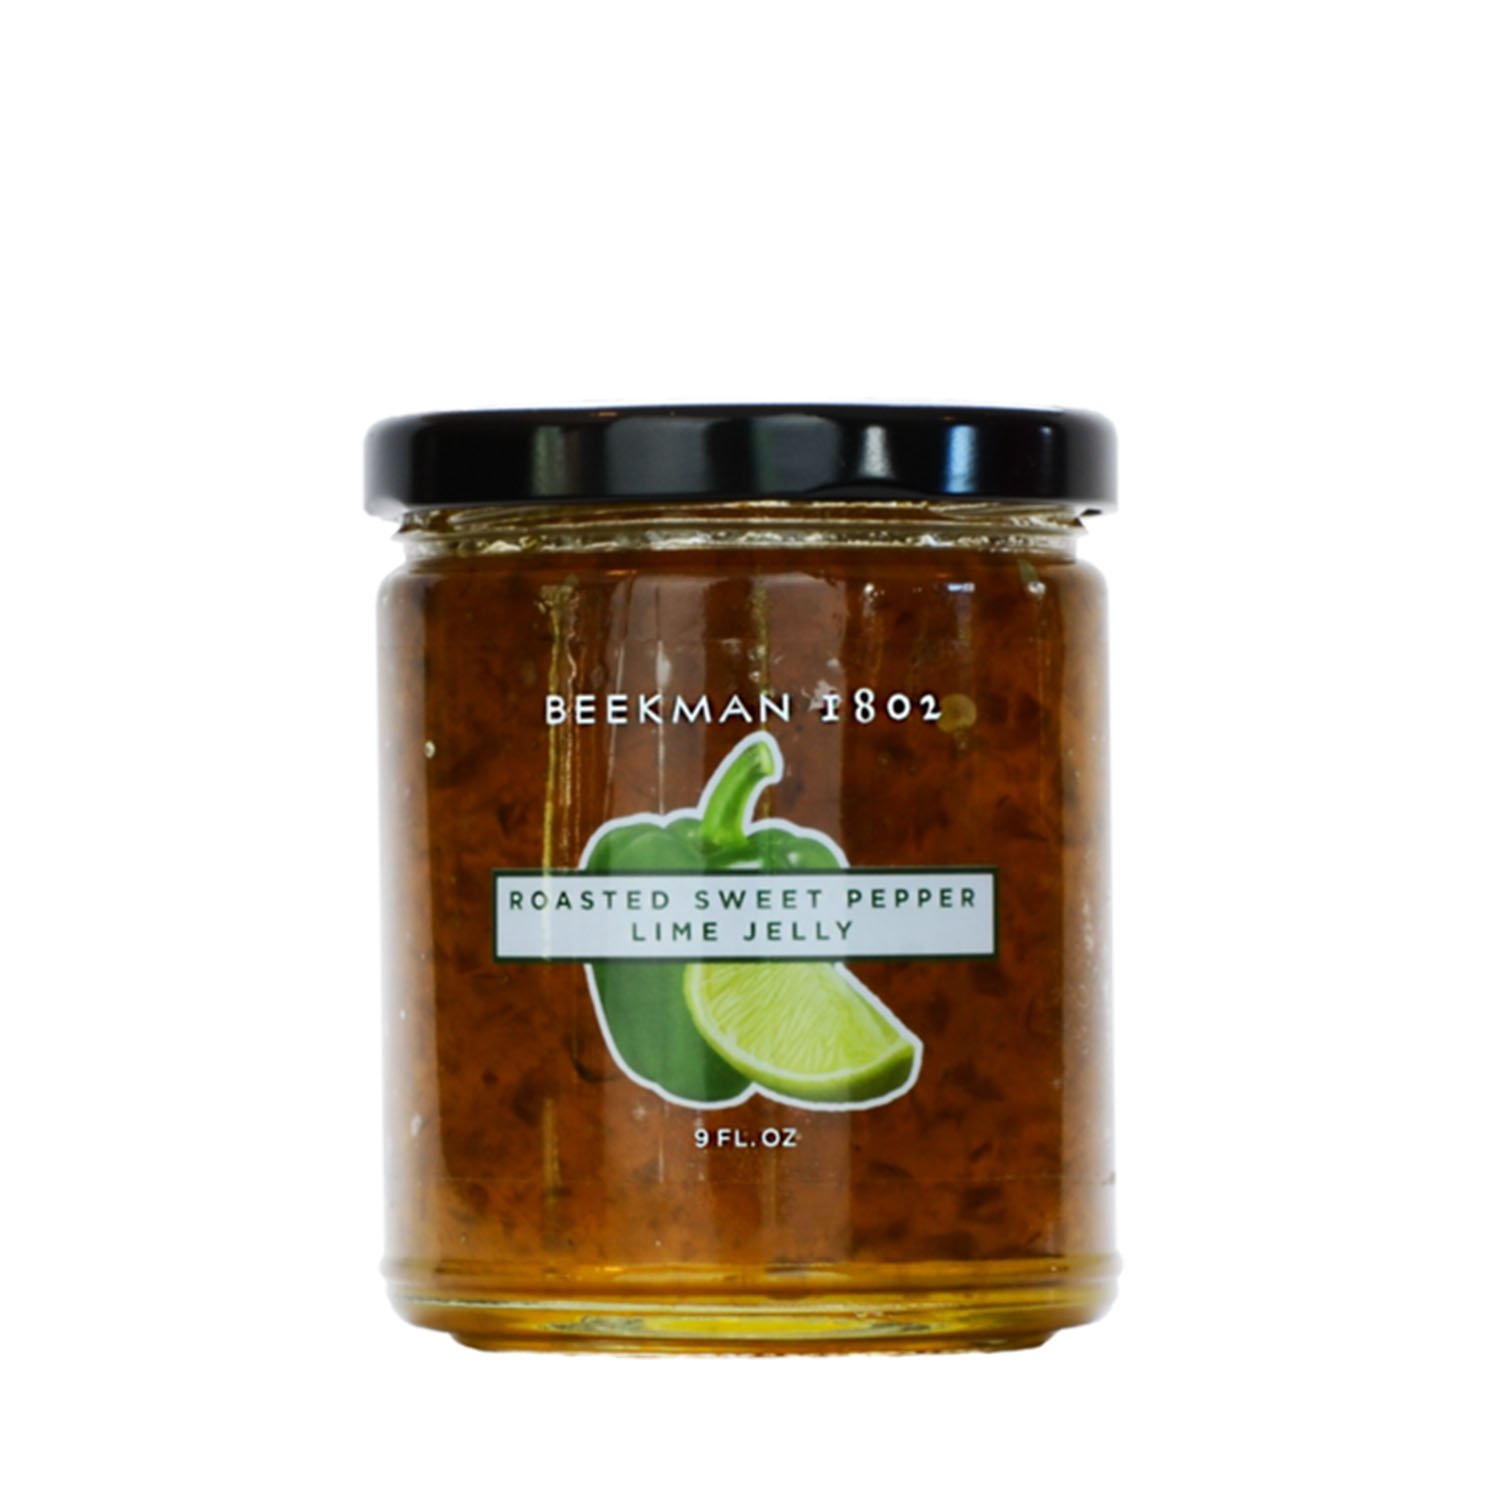 Roasted Sweet Pepper Lime Jelly